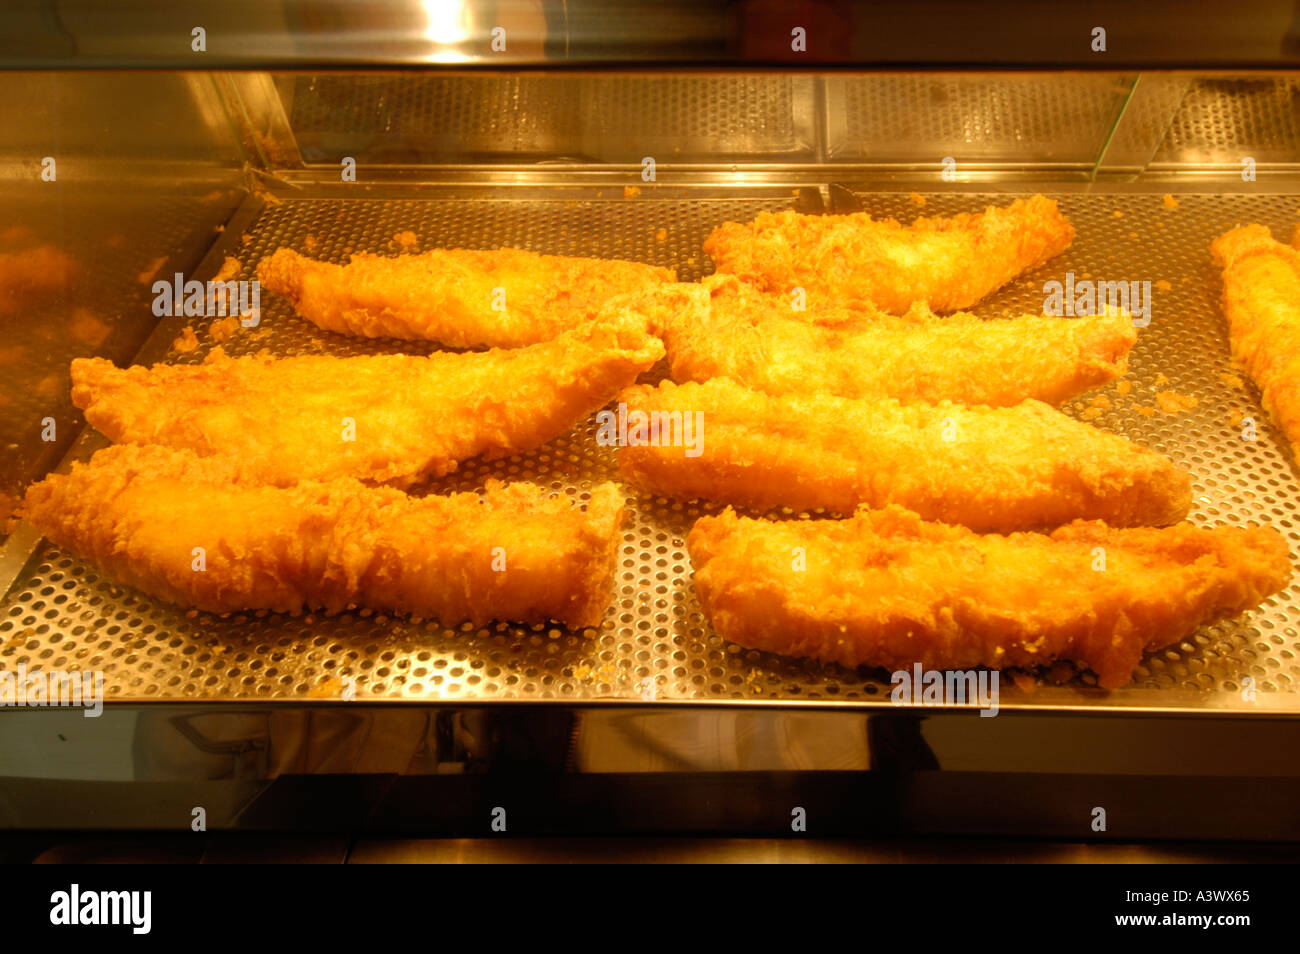 Cod fried in batter at fish and chip shop Stock Photo